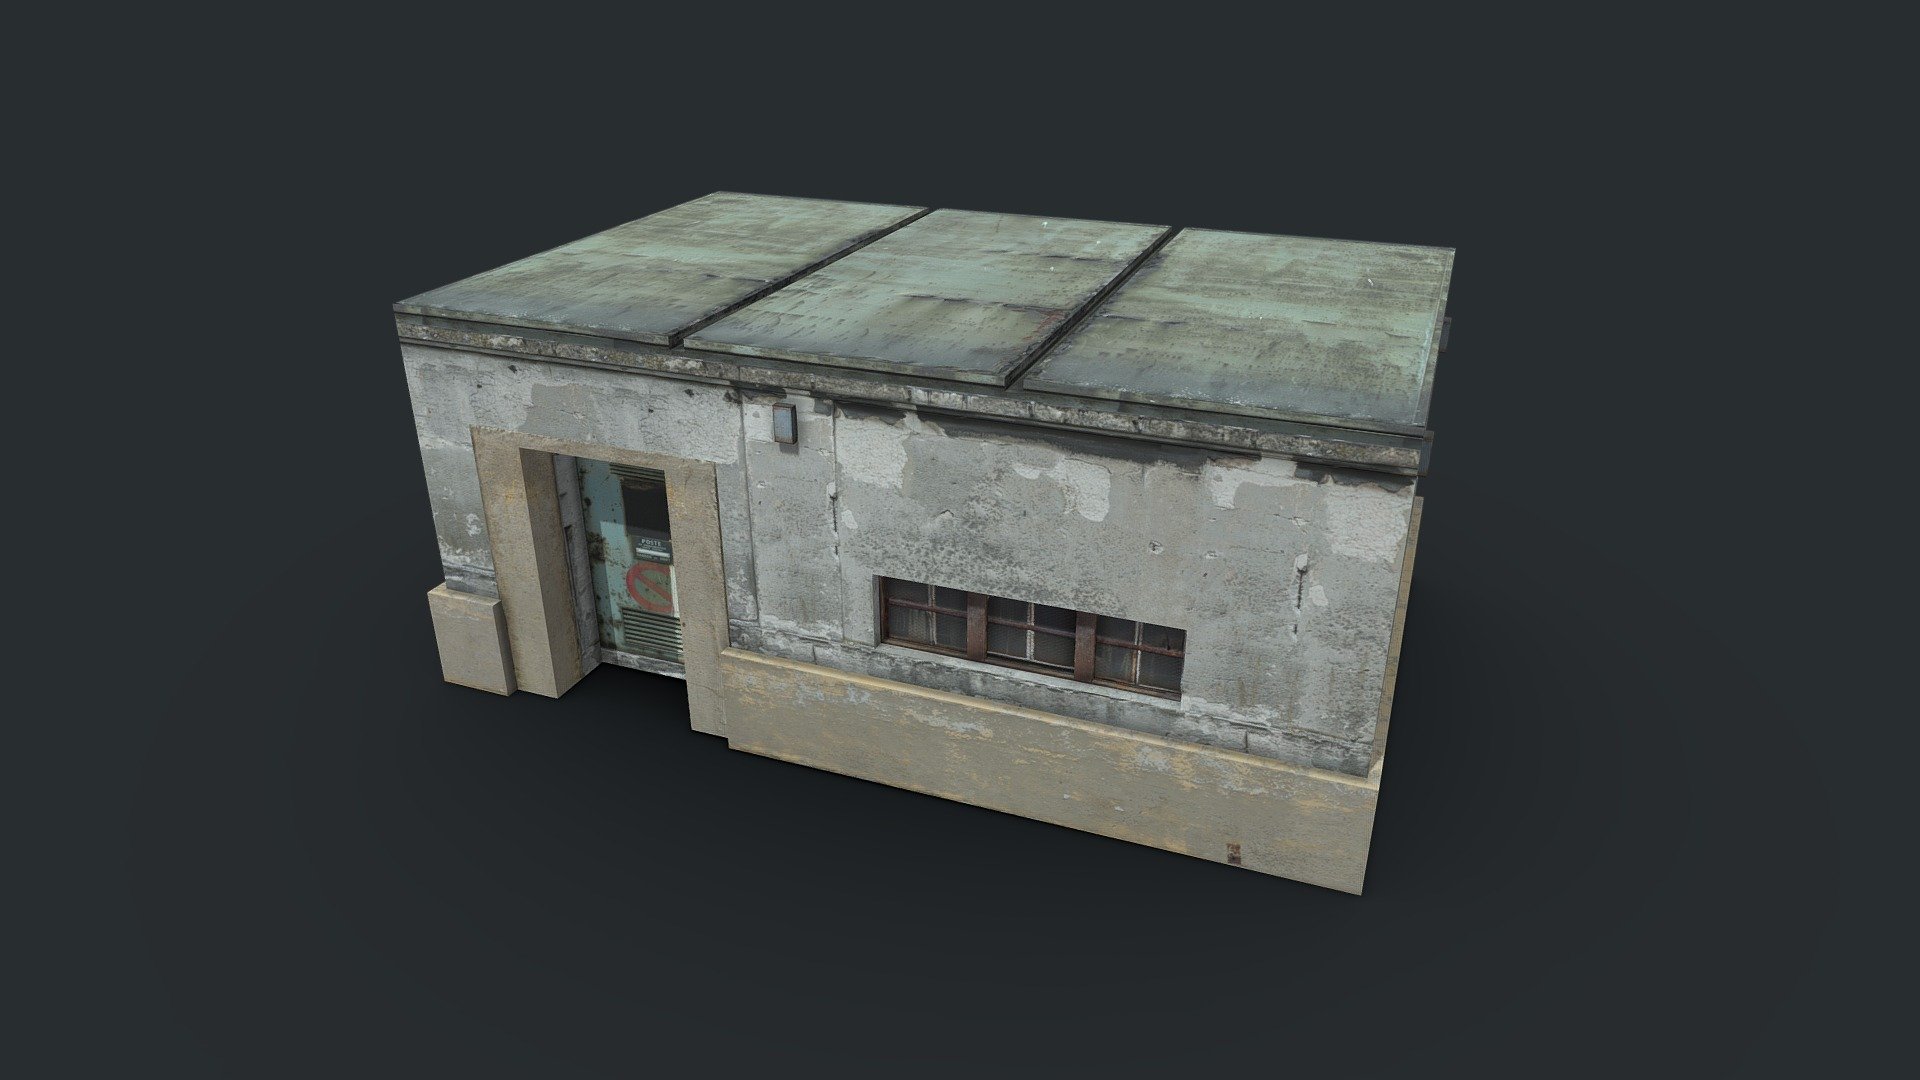 Barrack building - lowpoly game ready model

2K PBR Textures - Diffuse, Normal, Roughness - Barrack 3 - Buy Royalty Free 3D model by l0wpoly 3d model